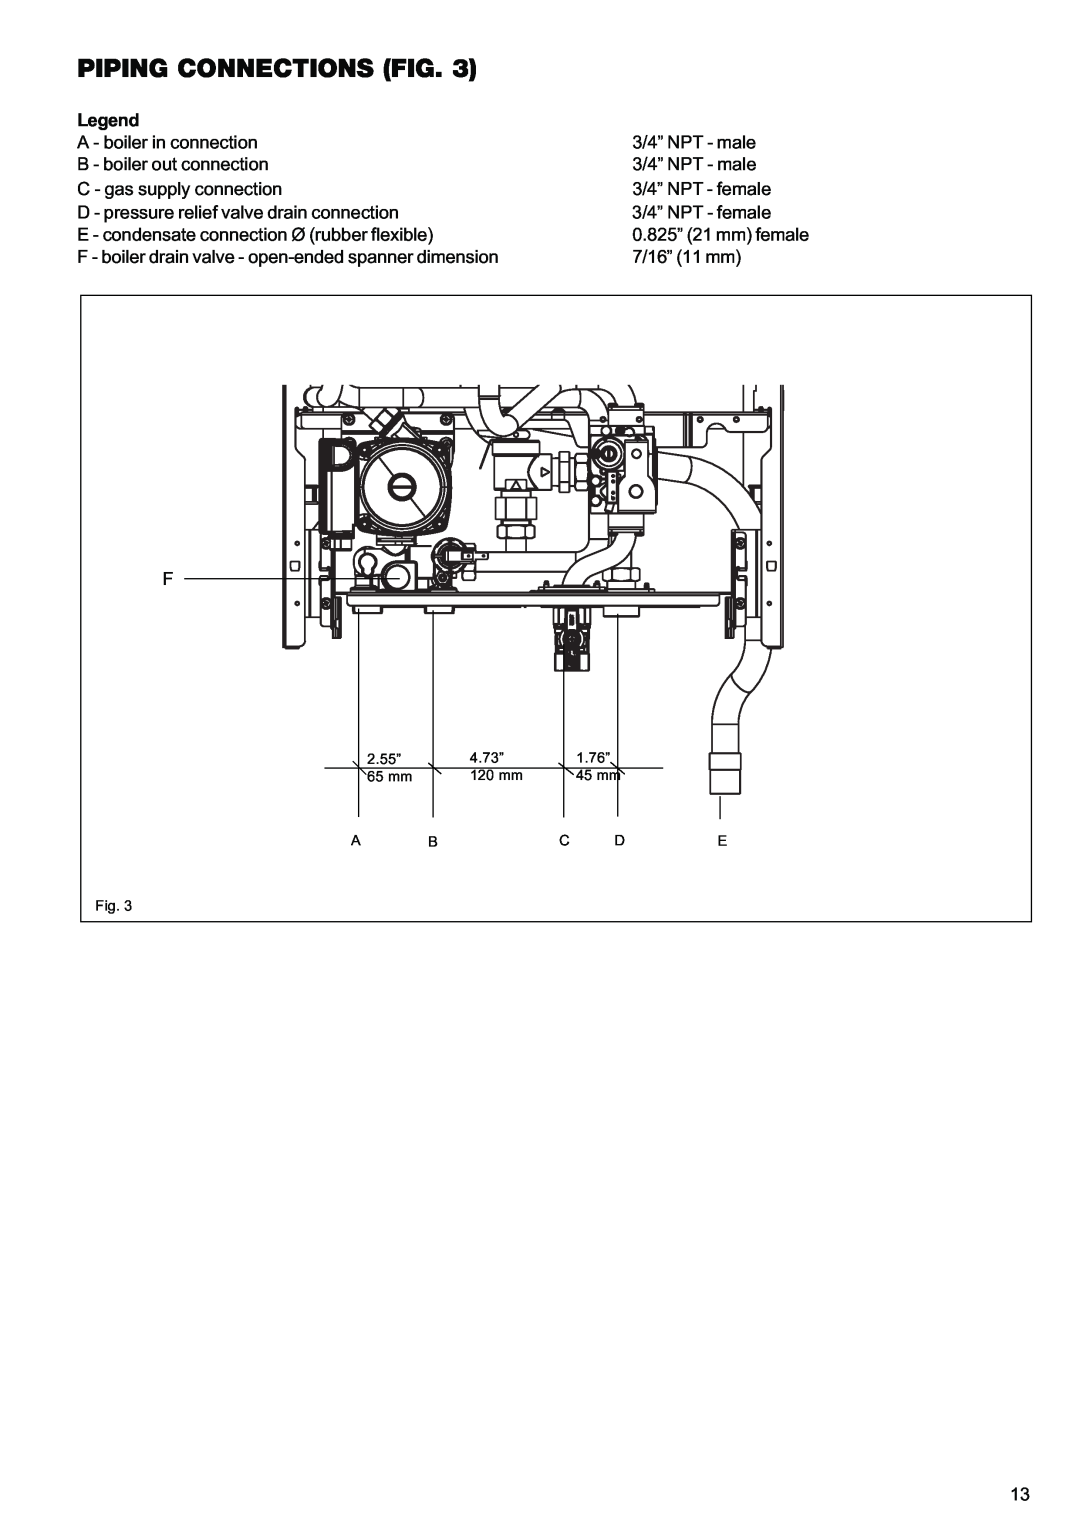 Raypak 120, 85 manual Piping Connections Fig, Legend 